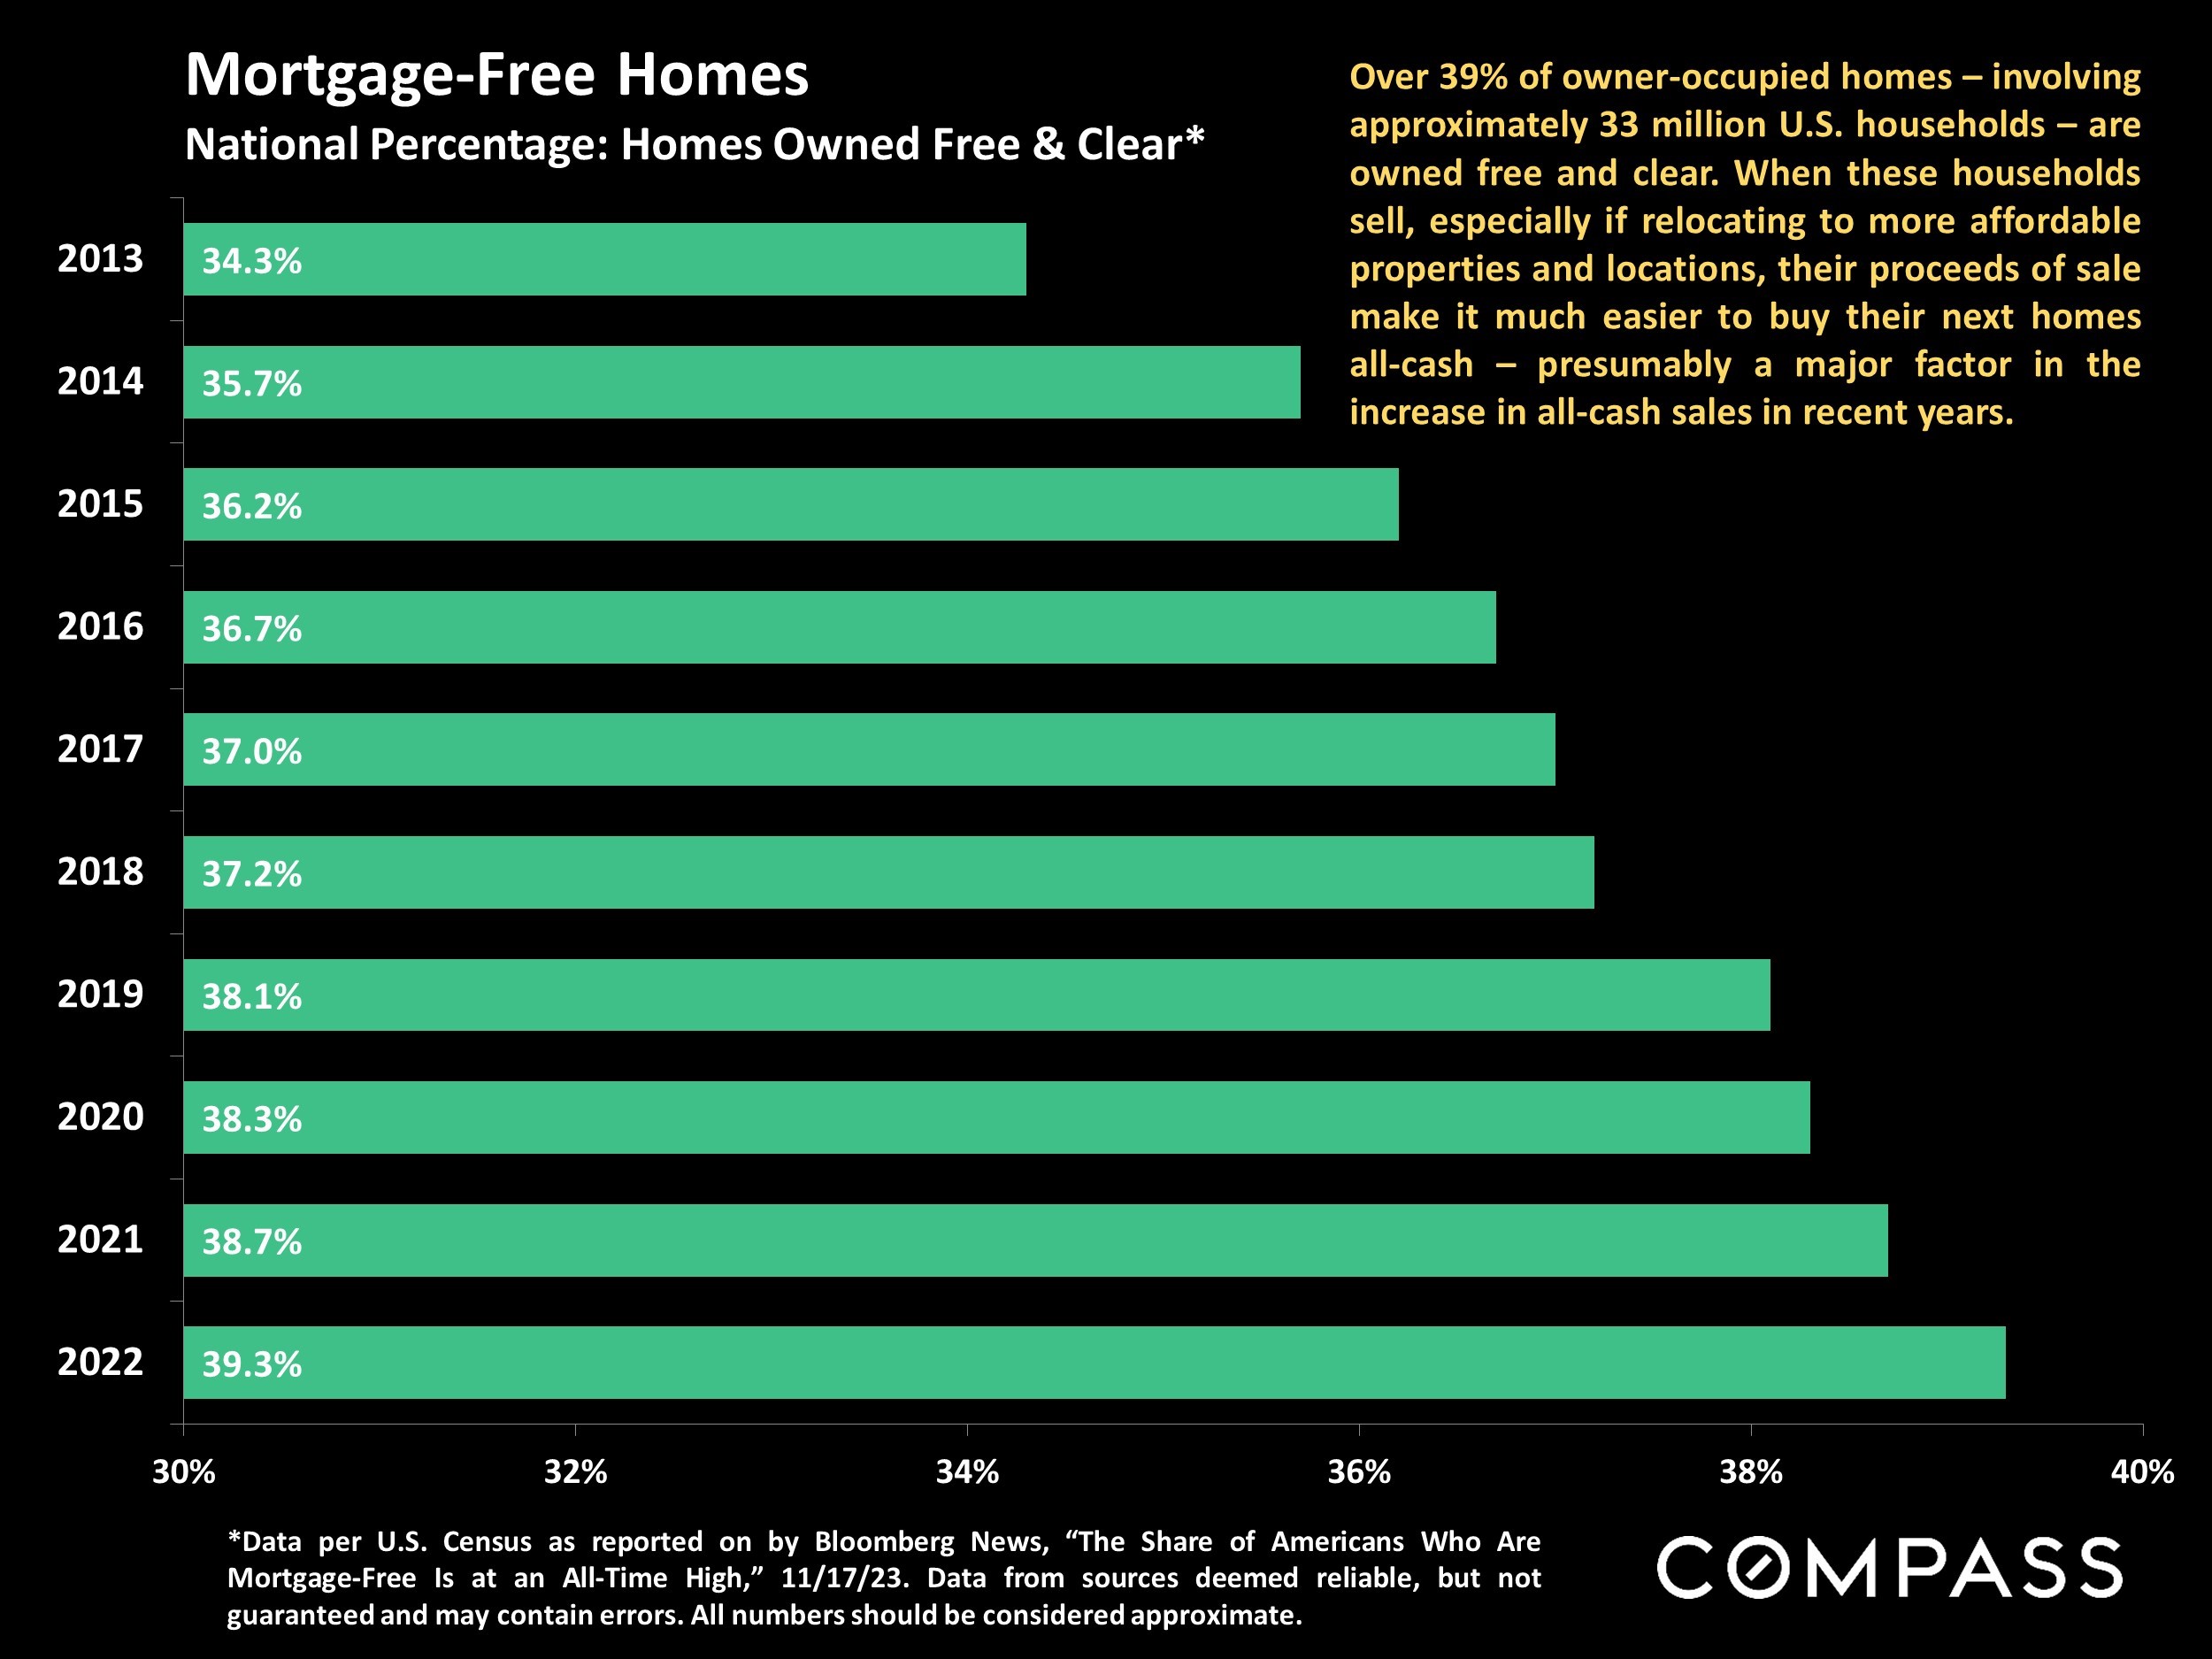 Mortgage-Free Homes National Percentage: Homes Owned Free & Clear**